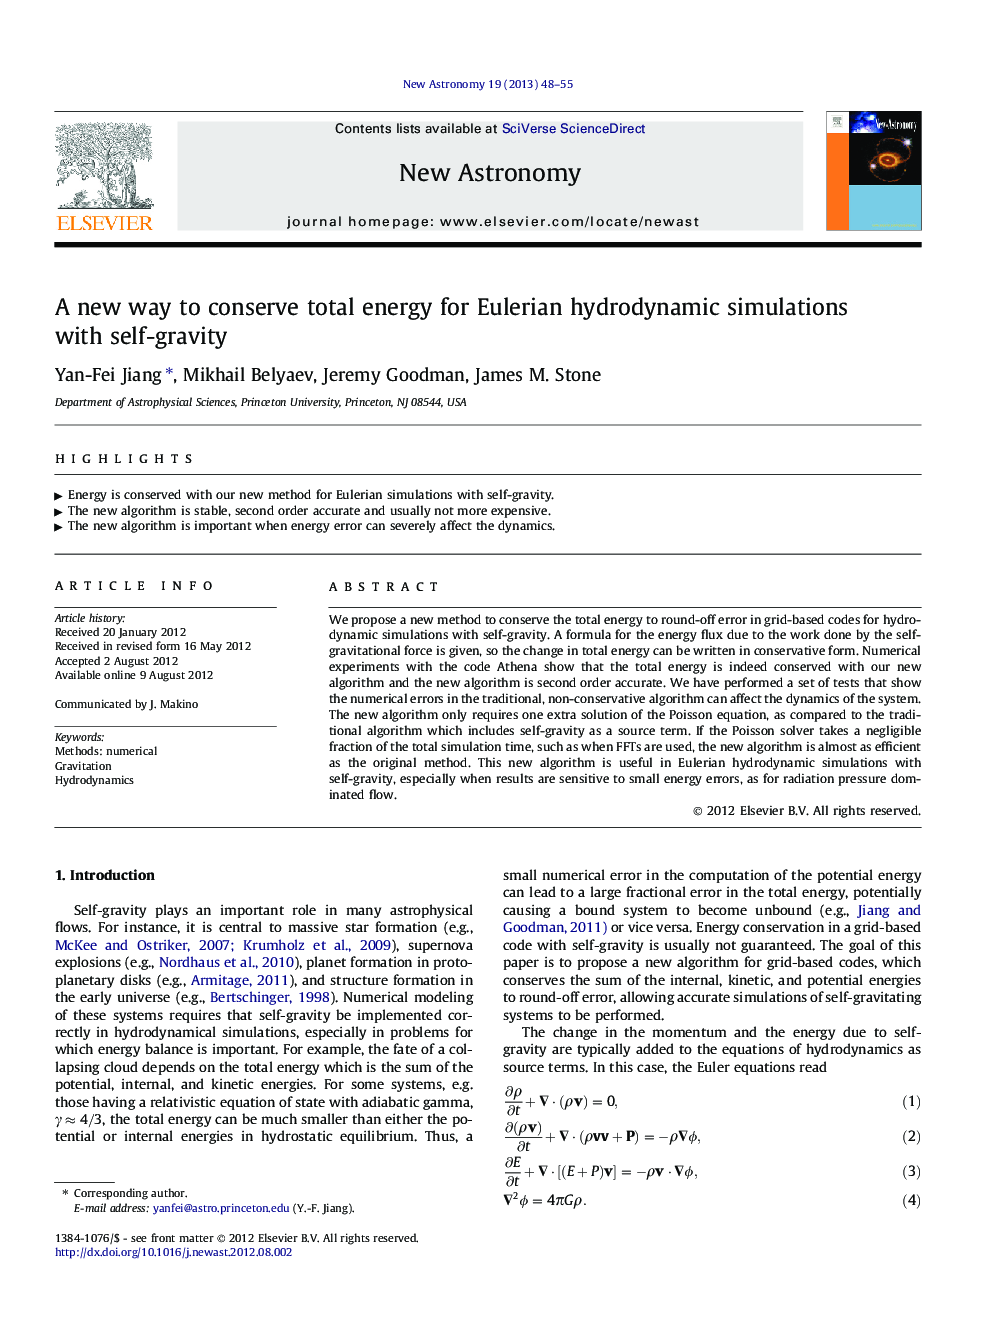 A new way to conserve total energy for Eulerian hydrodynamic simulations with self-gravity